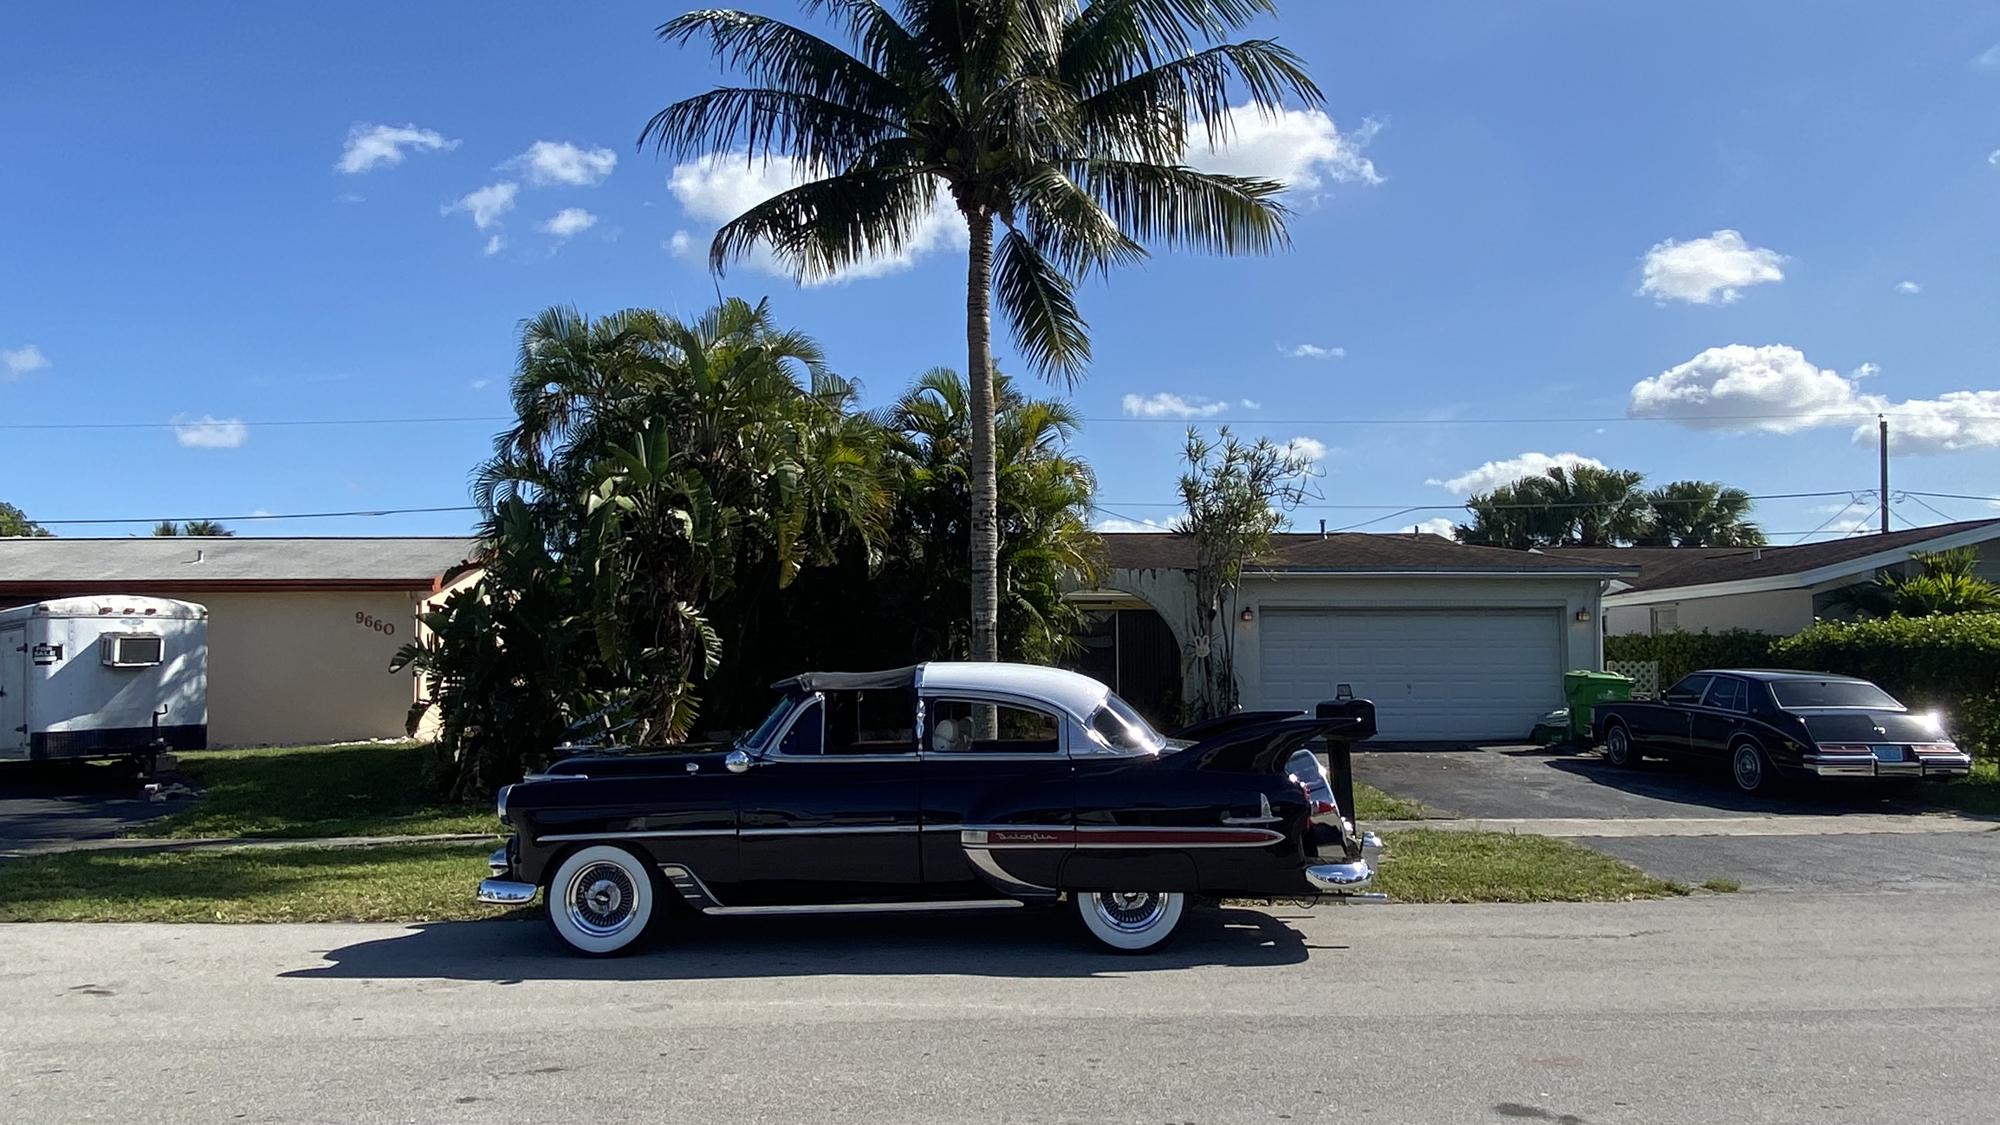 53 Chevy Custom Belair in the Sun, March 2021, front driver side Florida